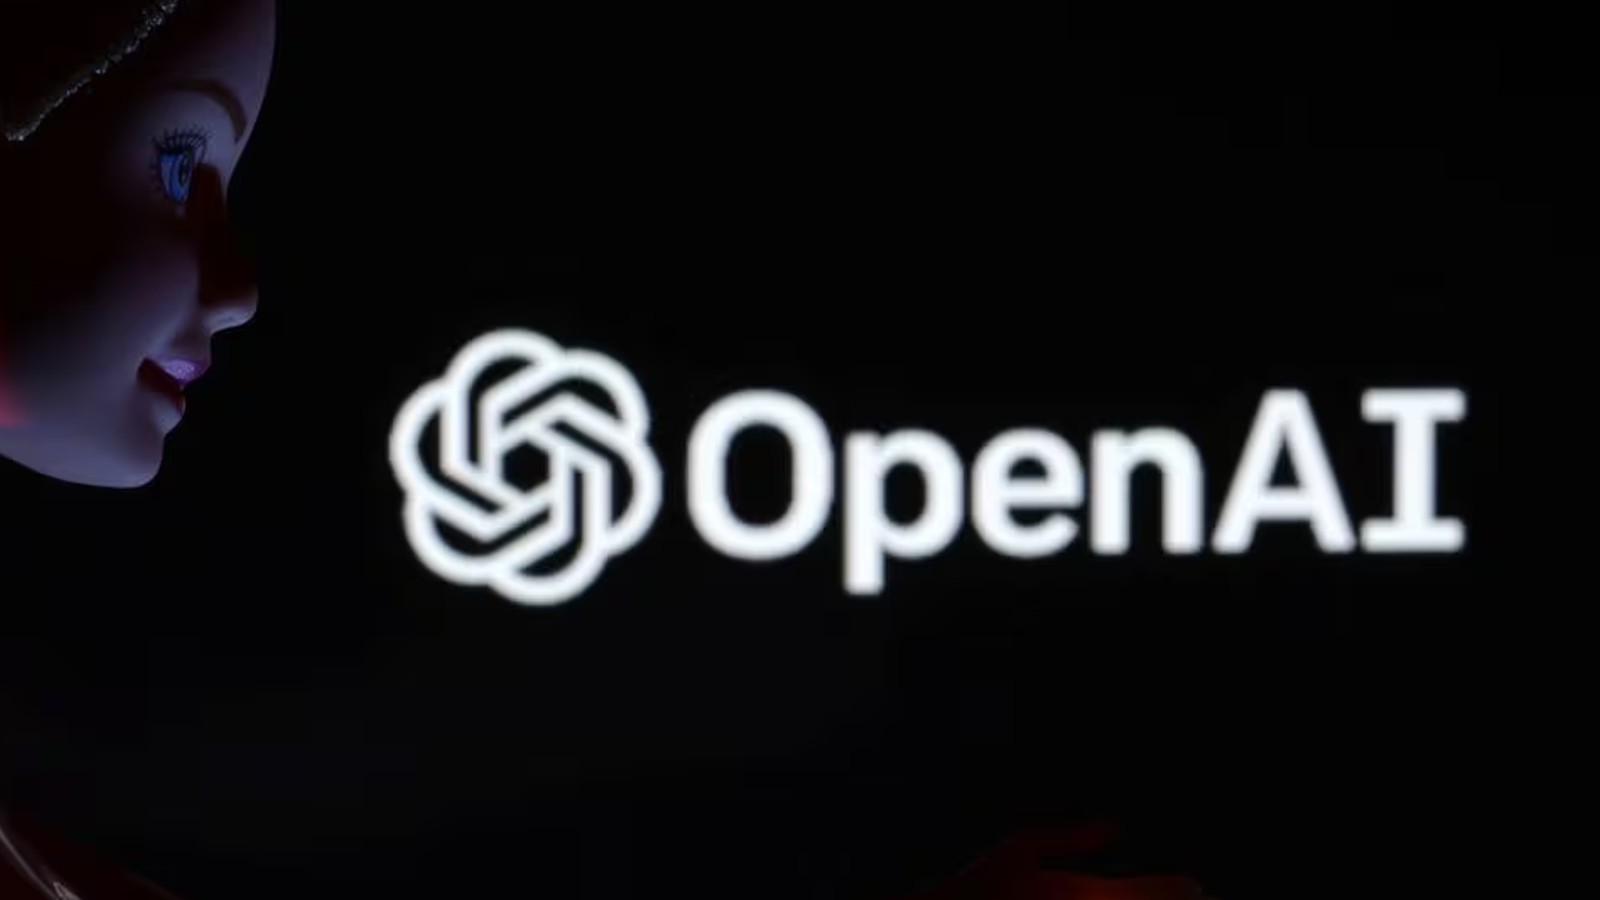 OpenAI outlines AI safety plan, allowing board to reverse decisions | Technology News